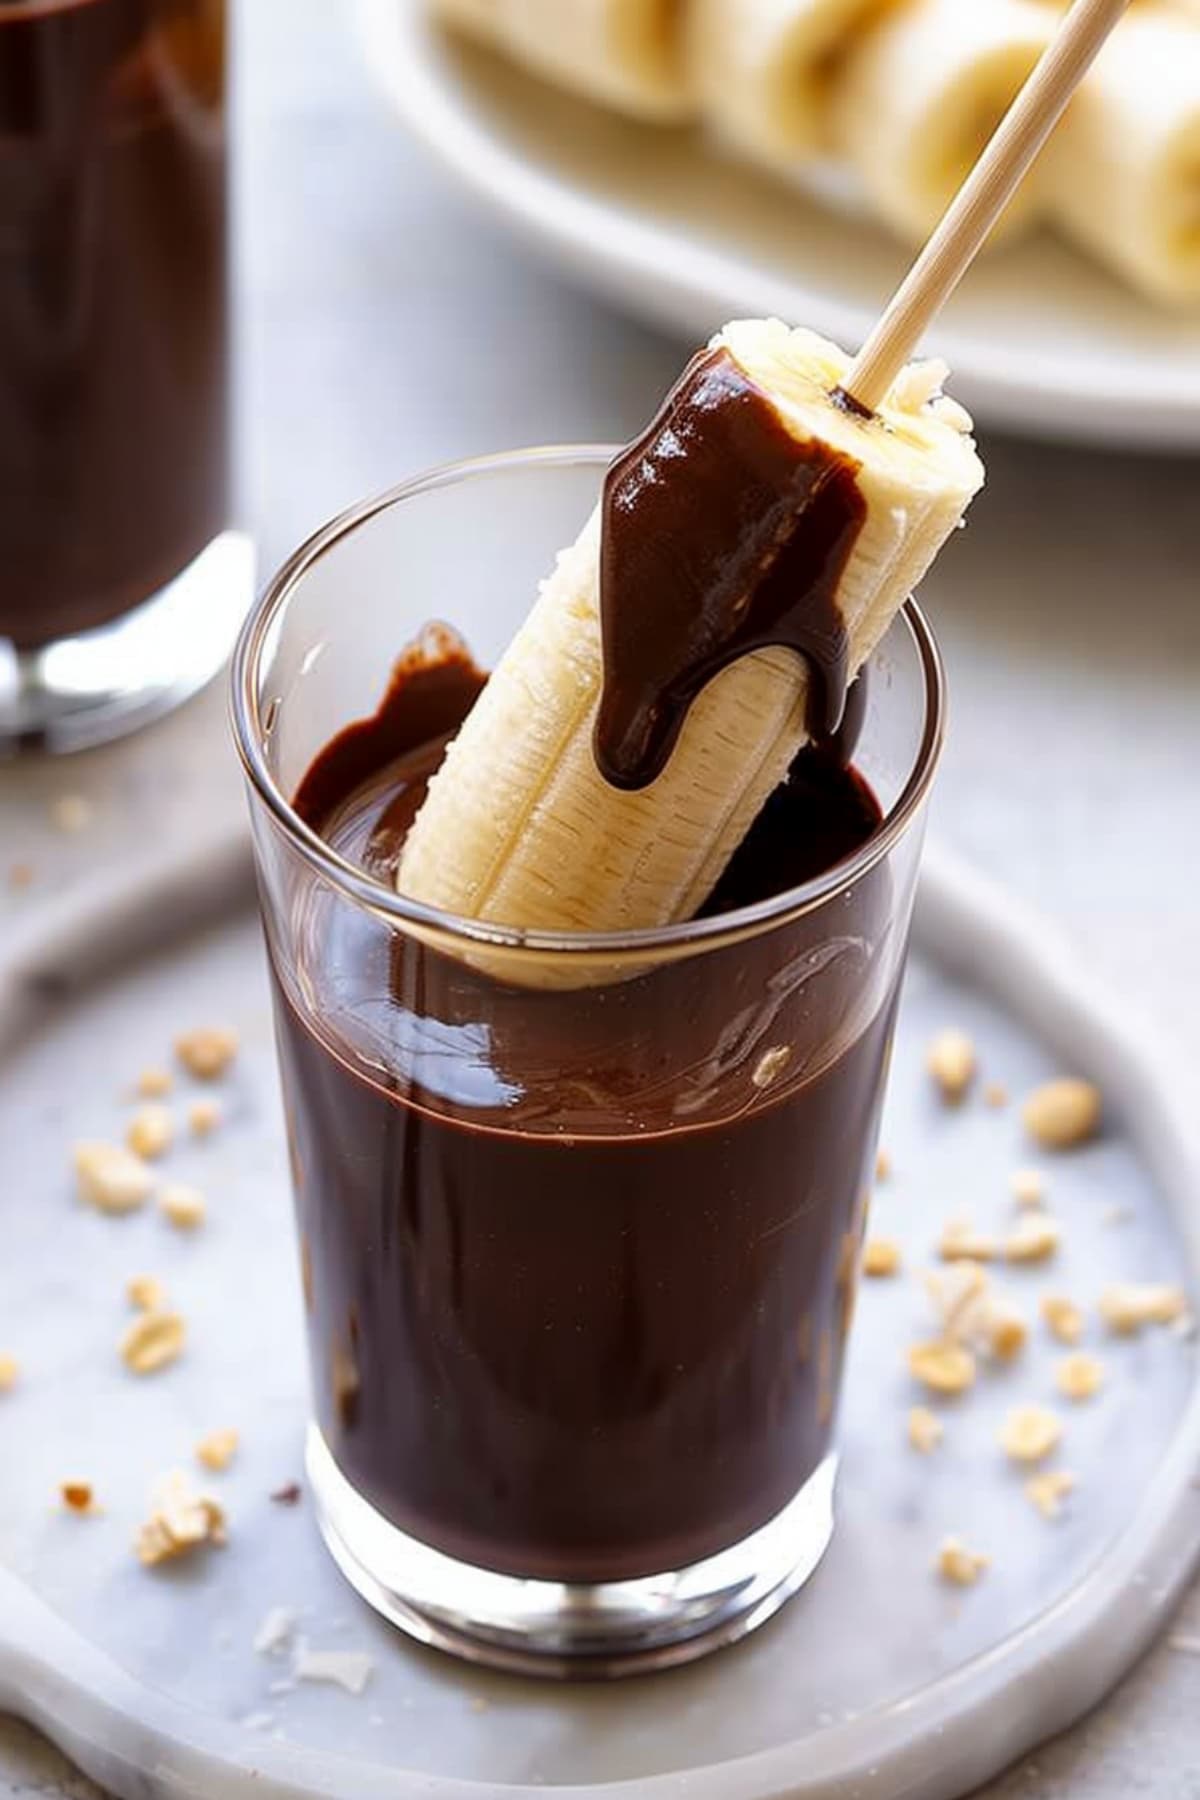 Banana dipped in a glass of chocolate